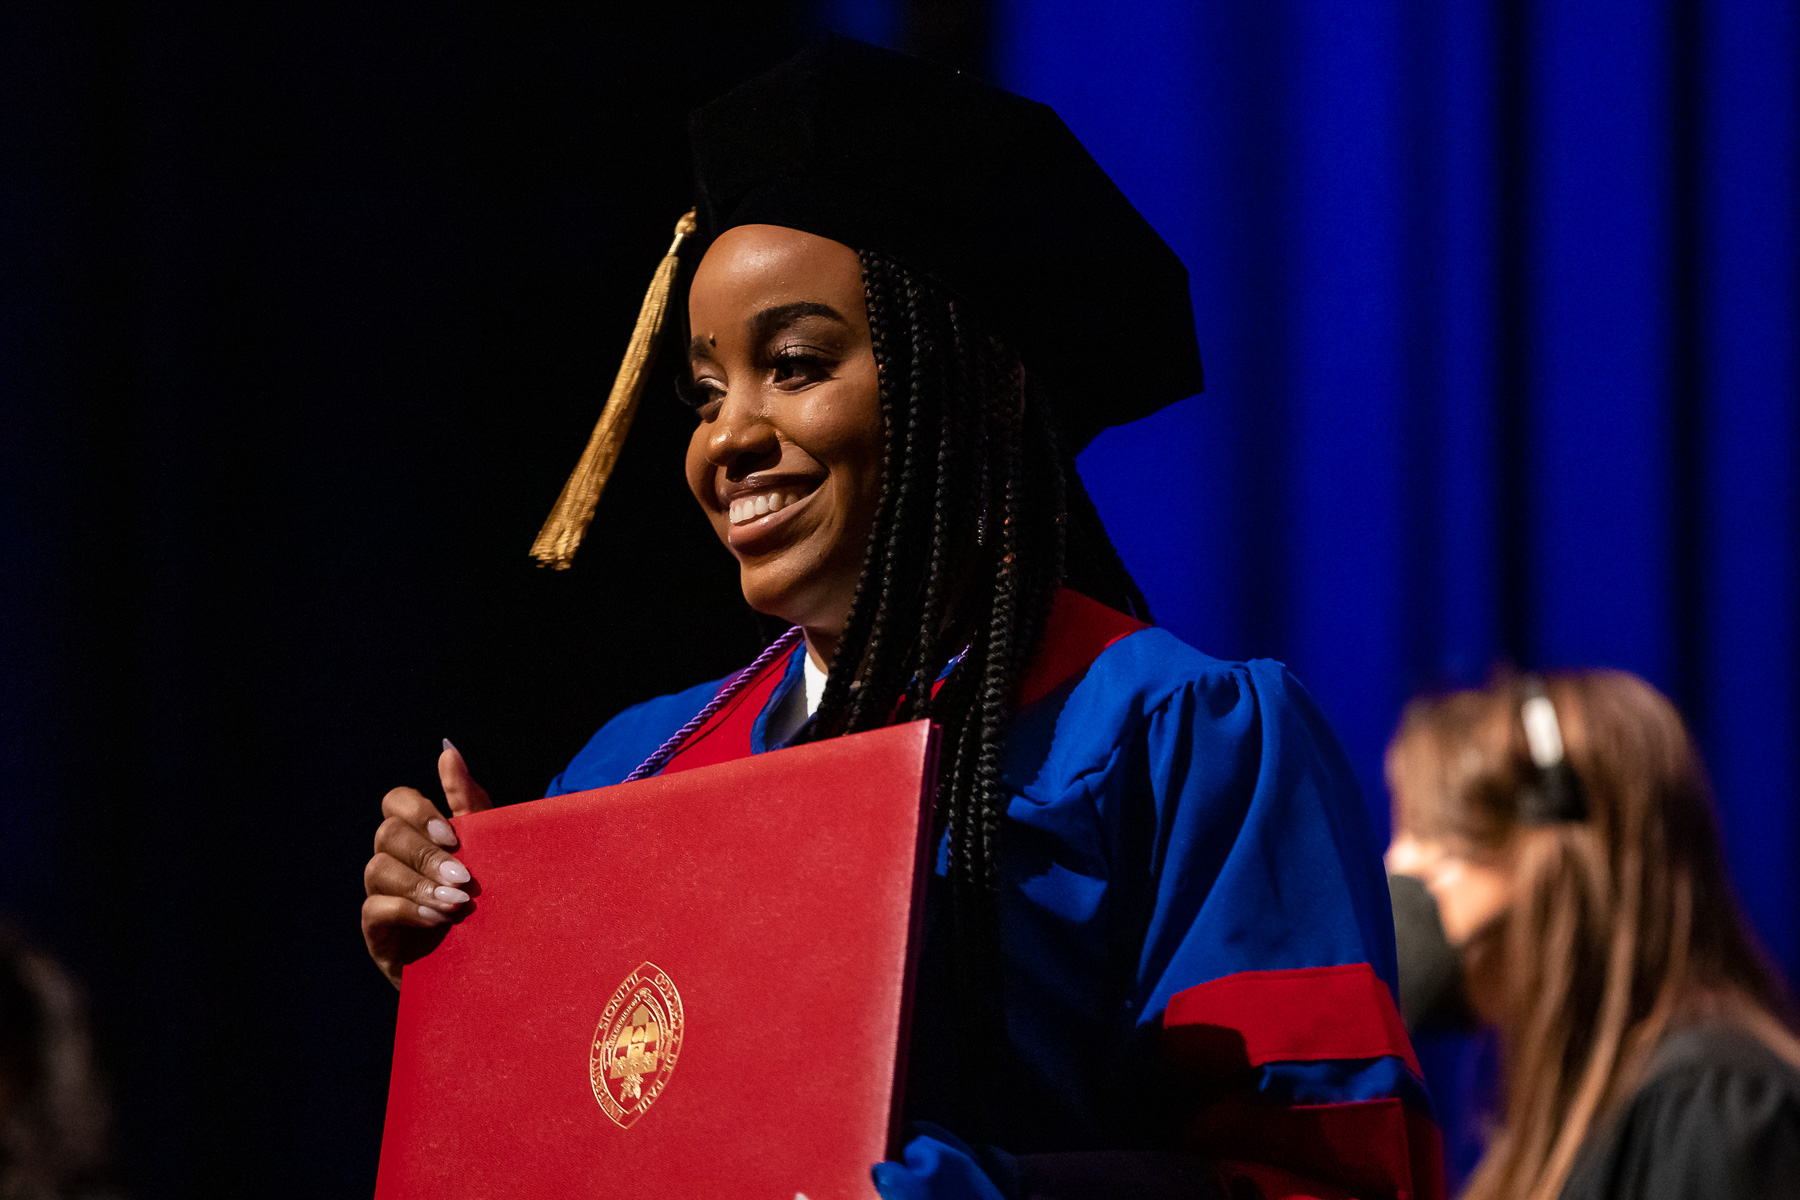 College of Law Commencement May, 2022